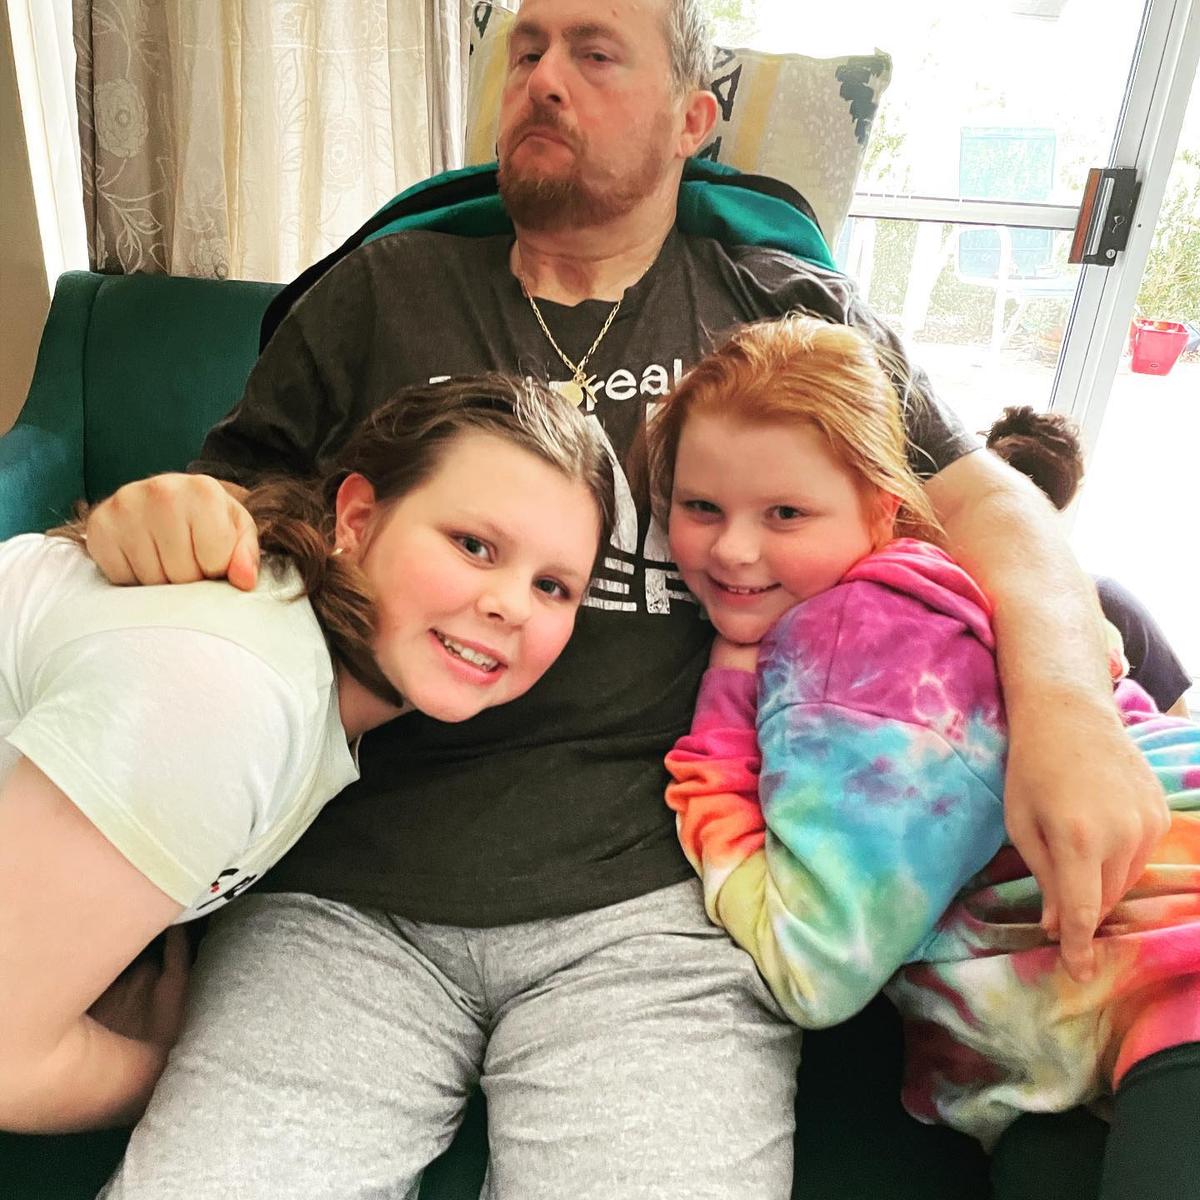 Paul with his two daughters in May 2021. (Courtesy of <a href="https://www.facebook.com/thecarefactor.tbi/">The Care Factor</a>)